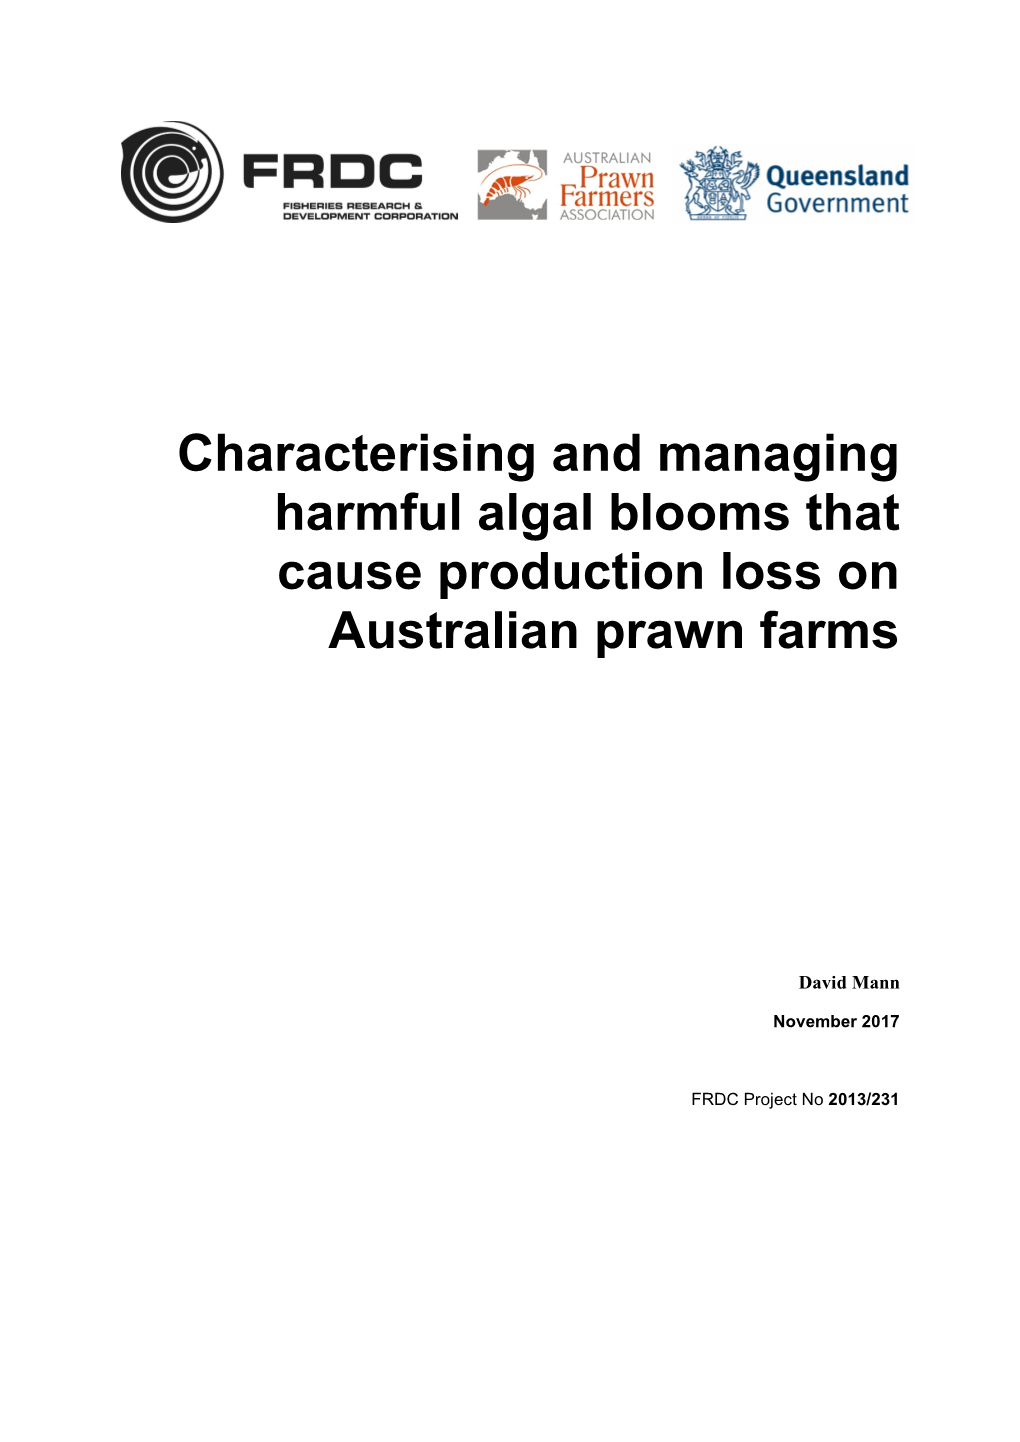 Characterising and Managing Harmful Algal Blooms That Cause Production Loss on Australian Prawn Farms